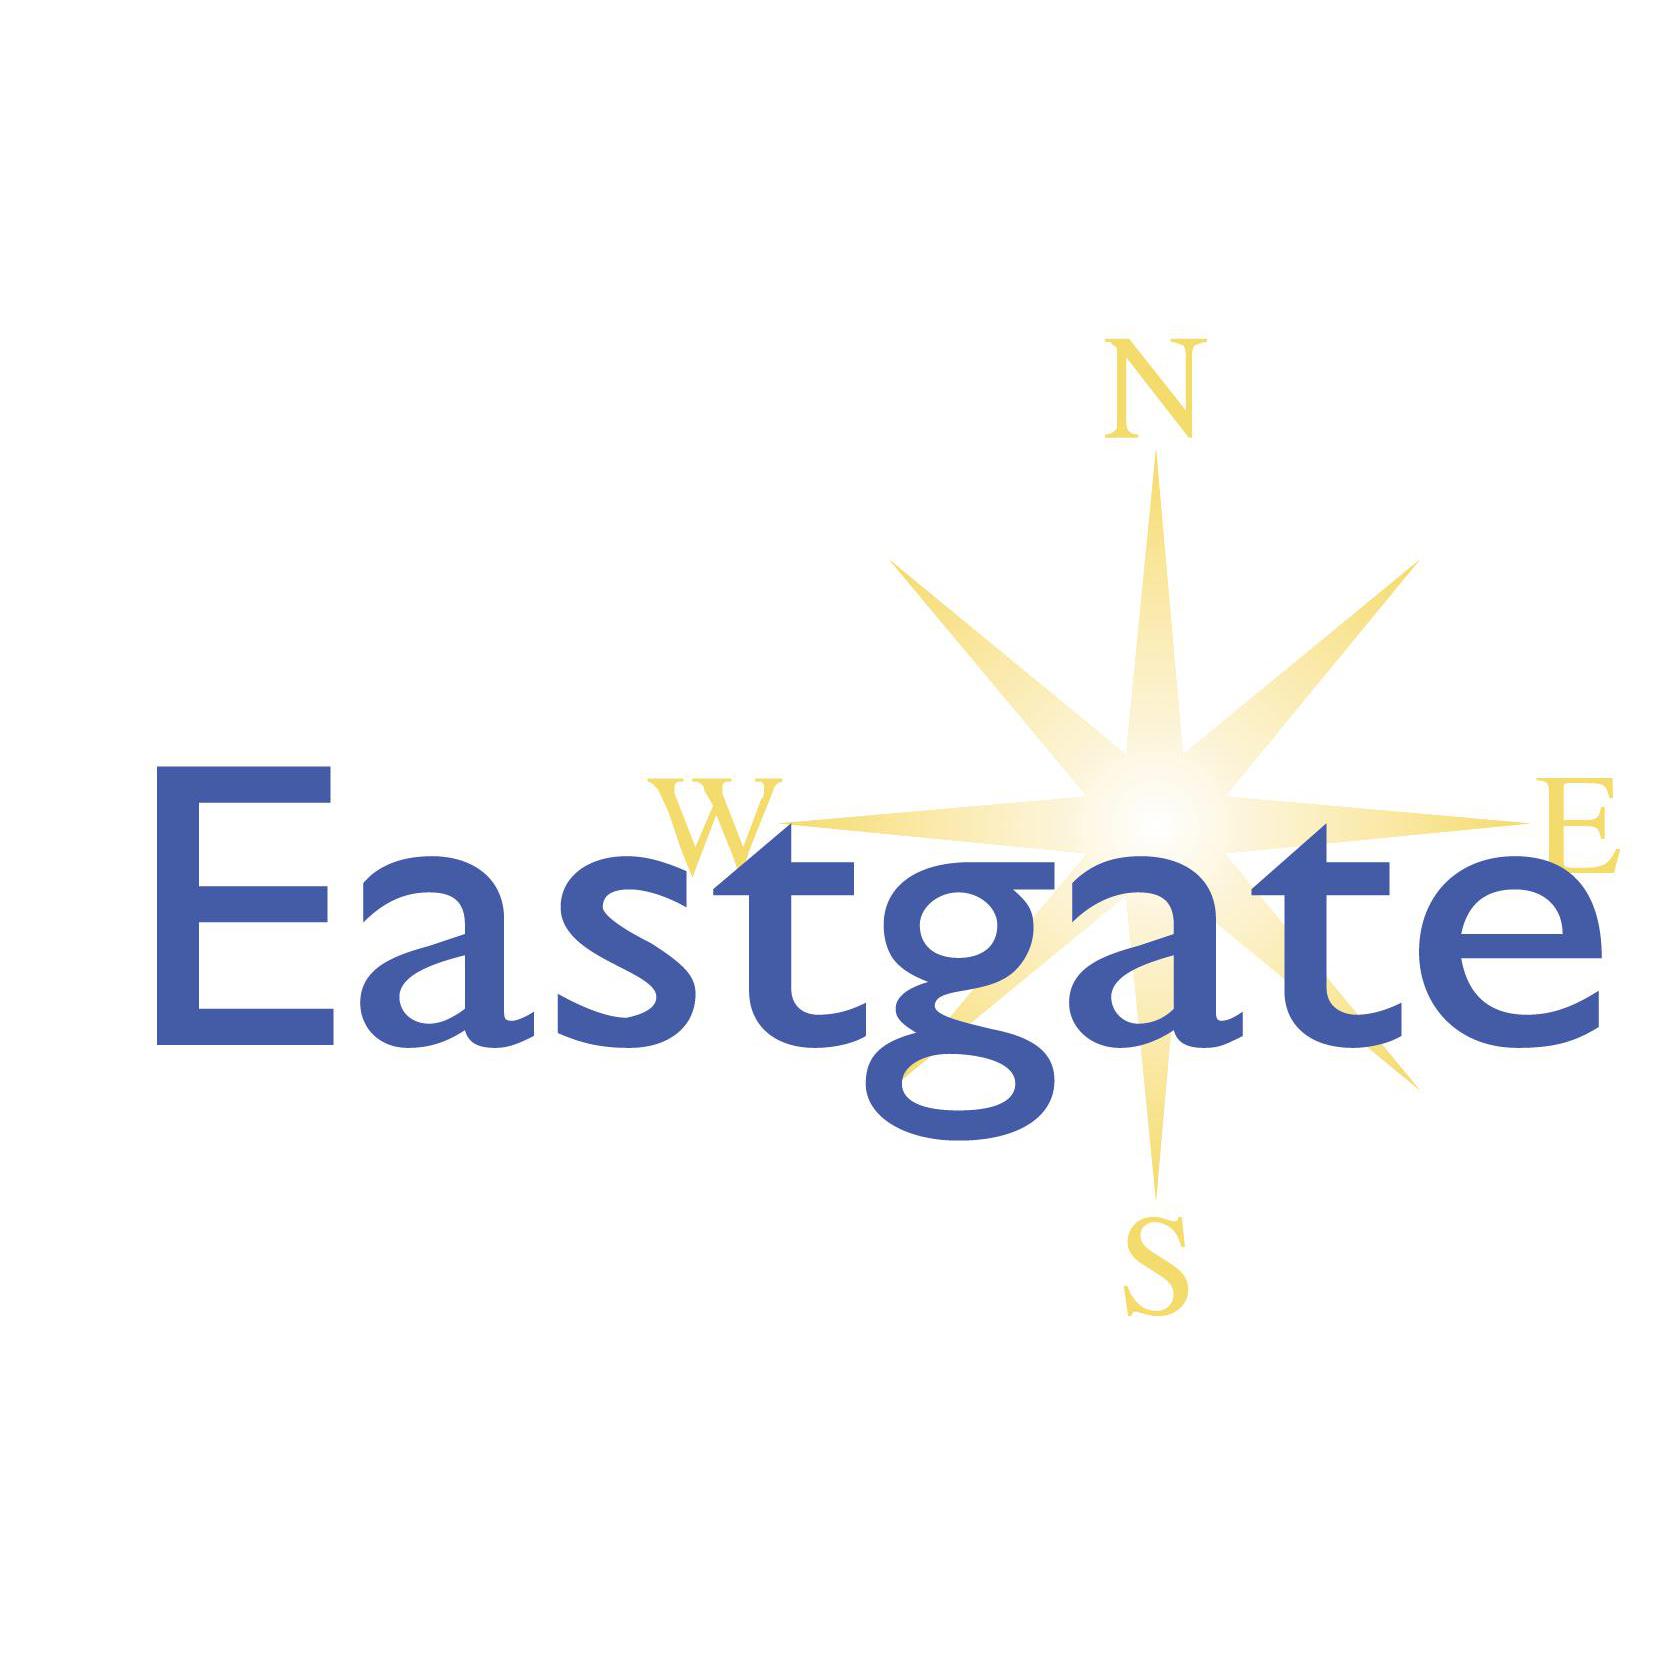 Eastgate Vets, Thetford - Thetford, Norfolk IP24 3AW - 01842 753991 | ShowMeLocal.com